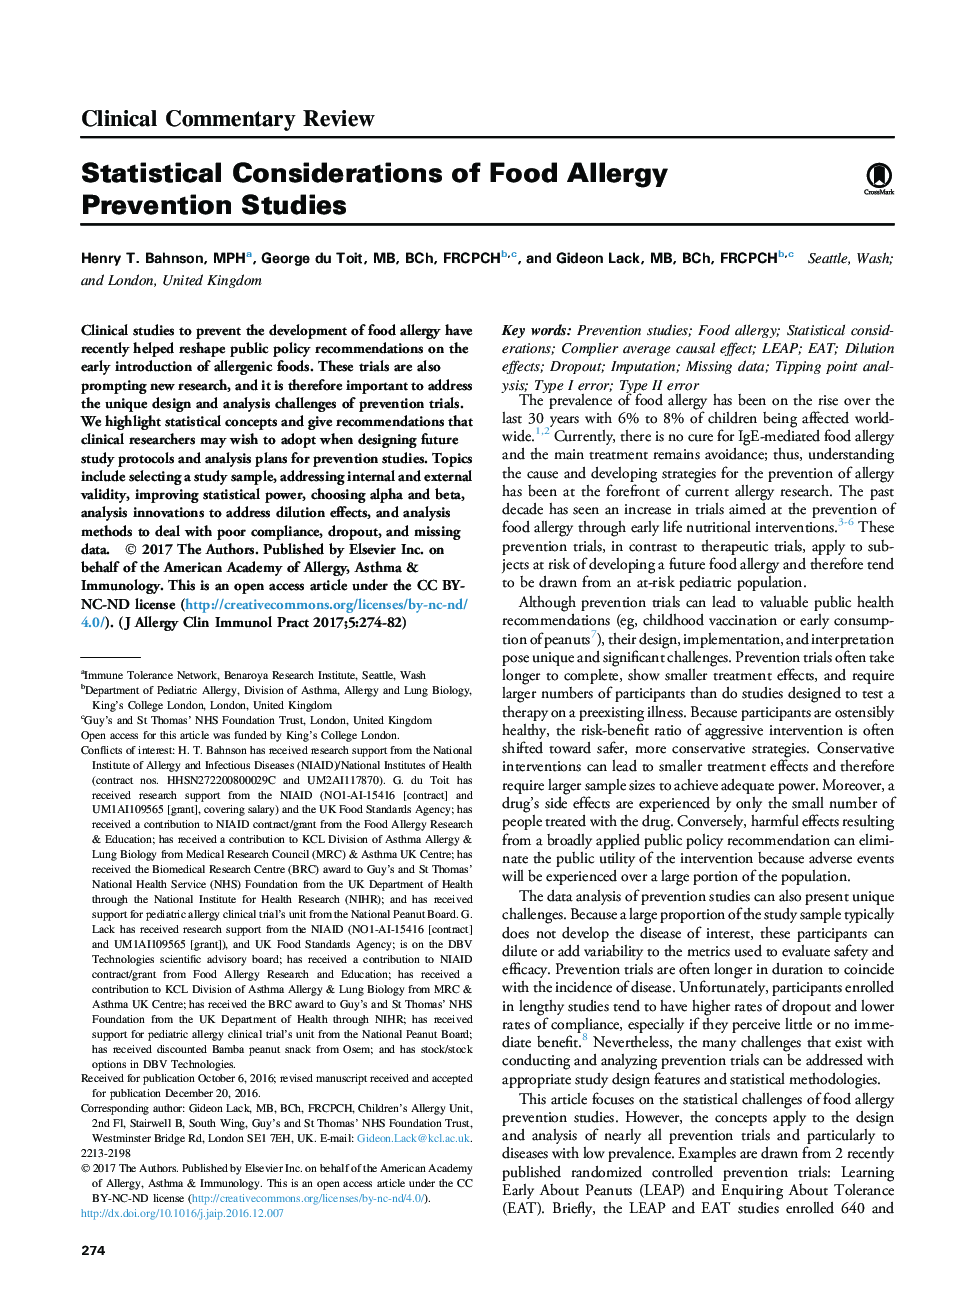 Statistical Considerations of Food Allergy Prevention Studies